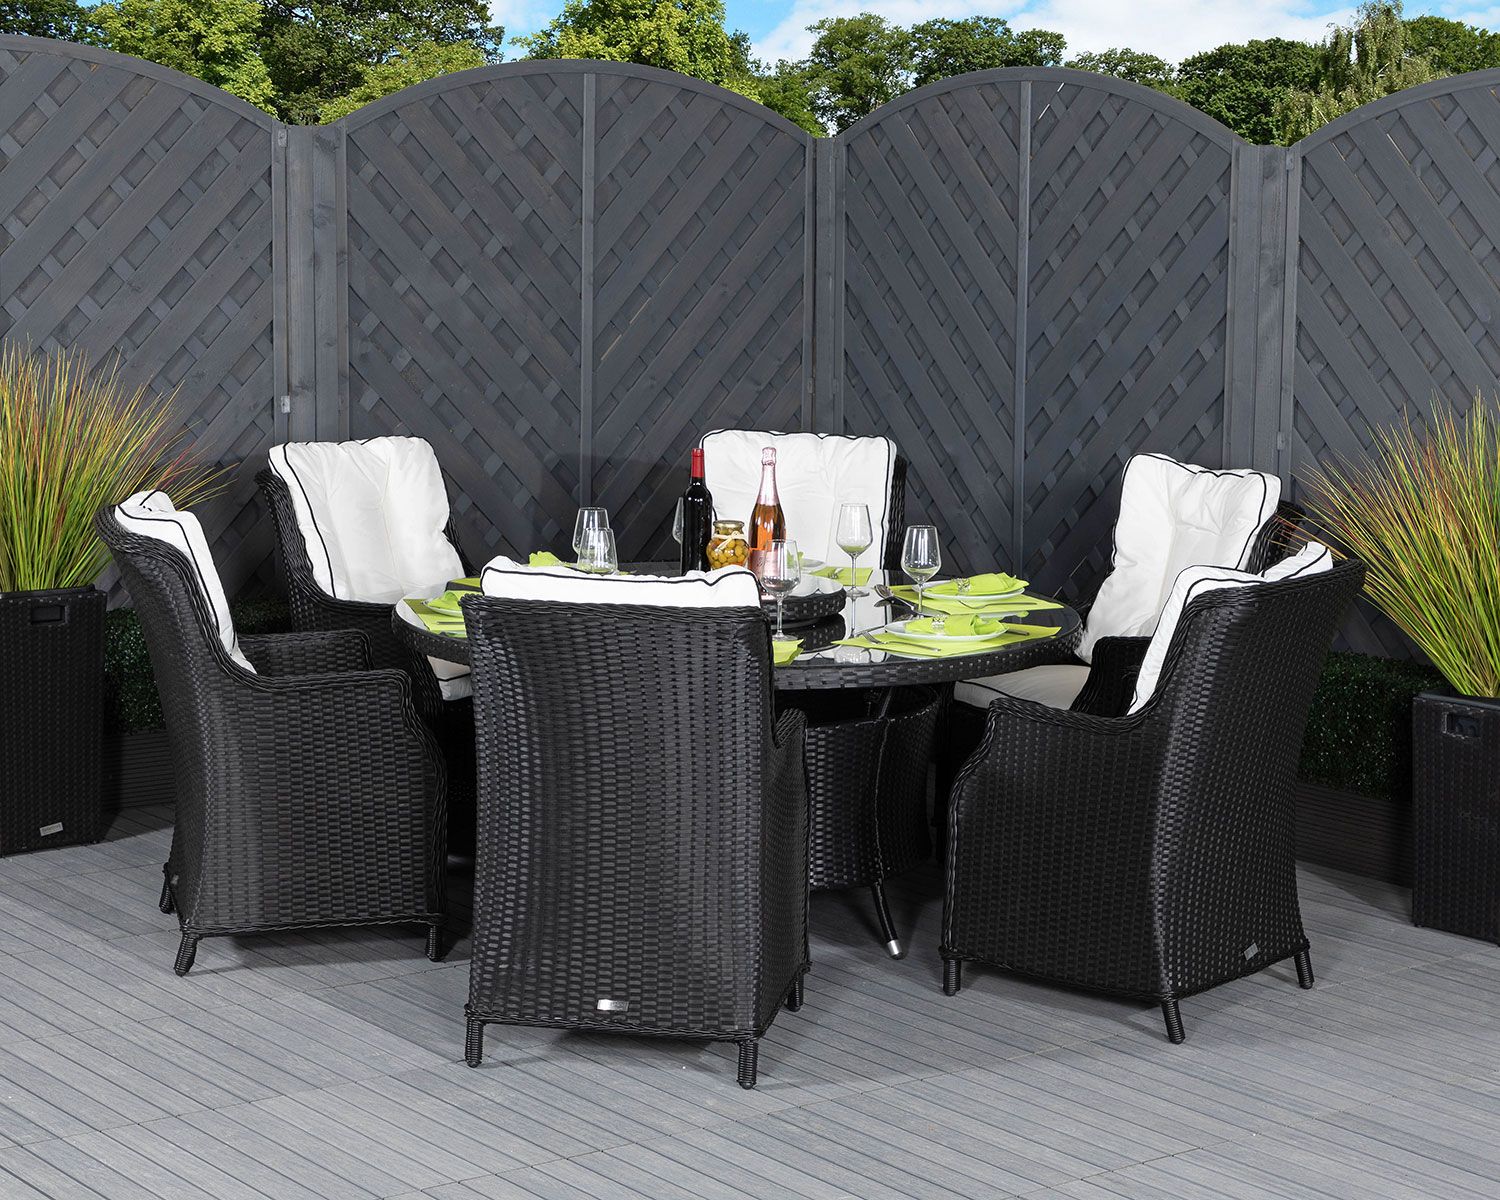 Large Round Rattan Garden Table & 6 Chairs In Black & White – Riviera With Black And Tan Rattan Console Tables (View 17 of 20)